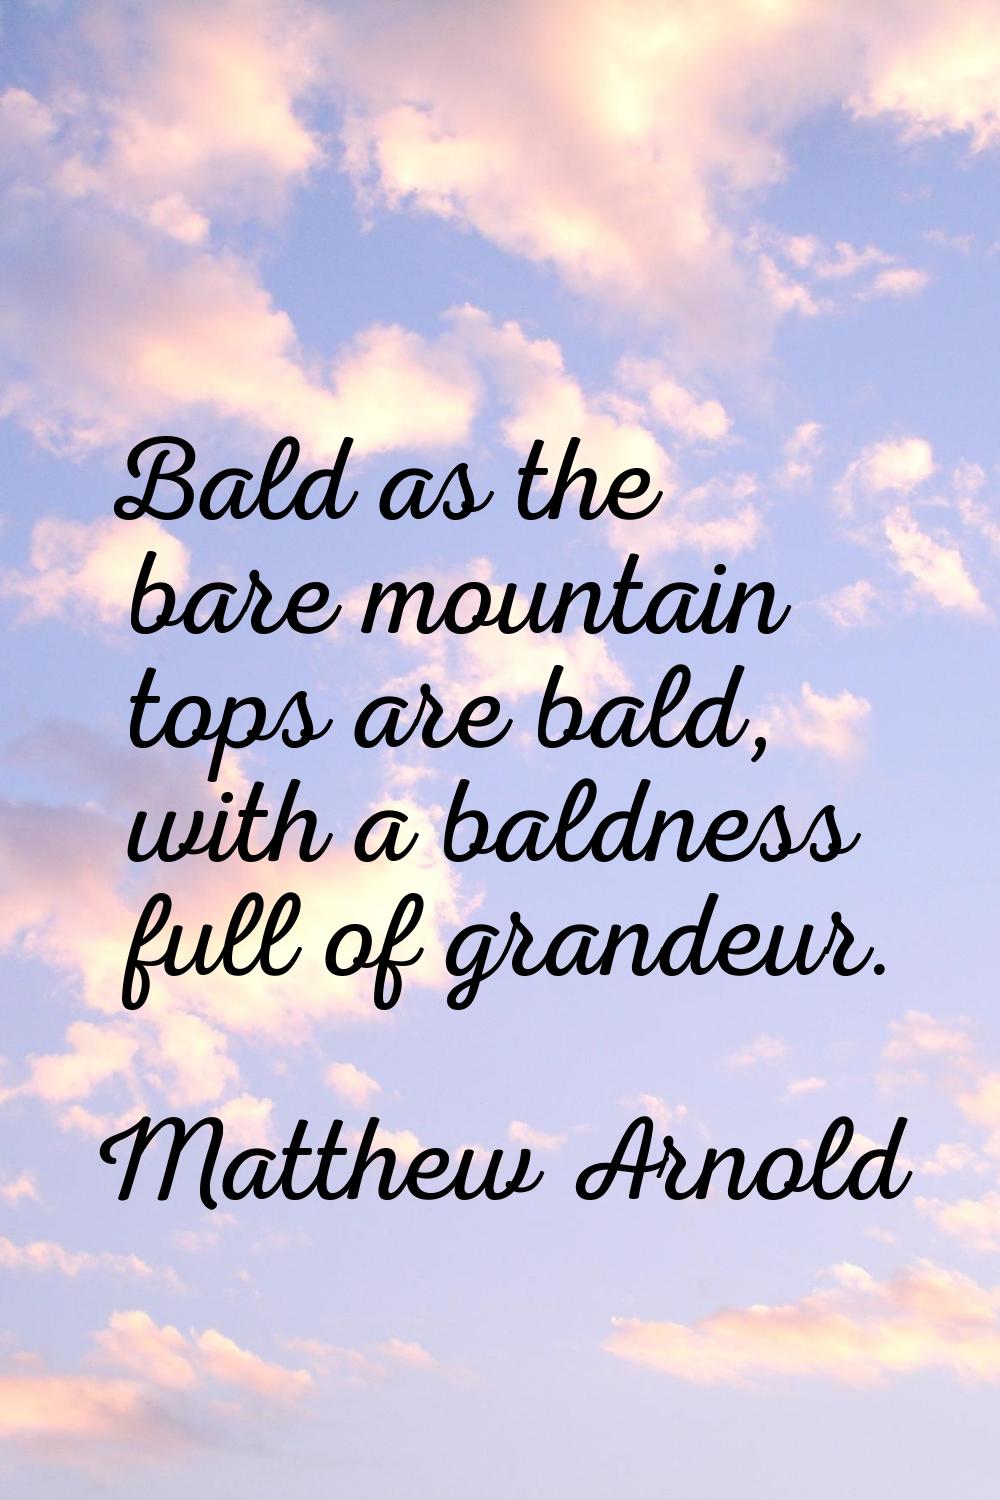 Bald as the bare mountain tops are bald, with a baldness full of grandeur.